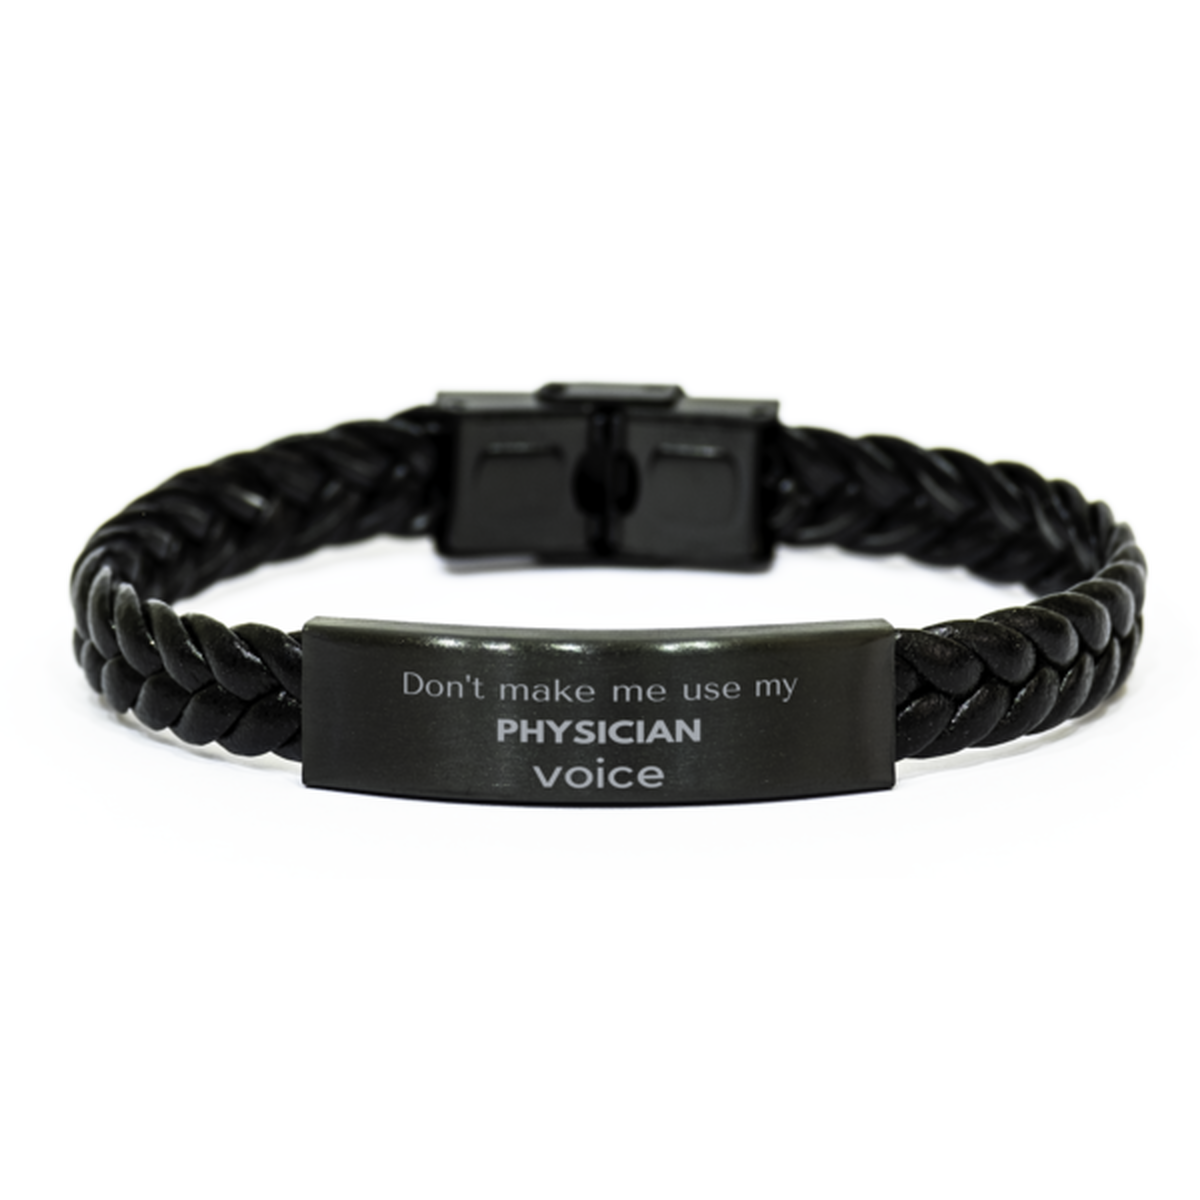 Don't make me use my Physician voice, Sarcasm Physician Gifts, Christmas Physician Braided Leather Bracelet Birthday Unique Gifts For Physician Coworkers, Men, Women, Colleague, Friends